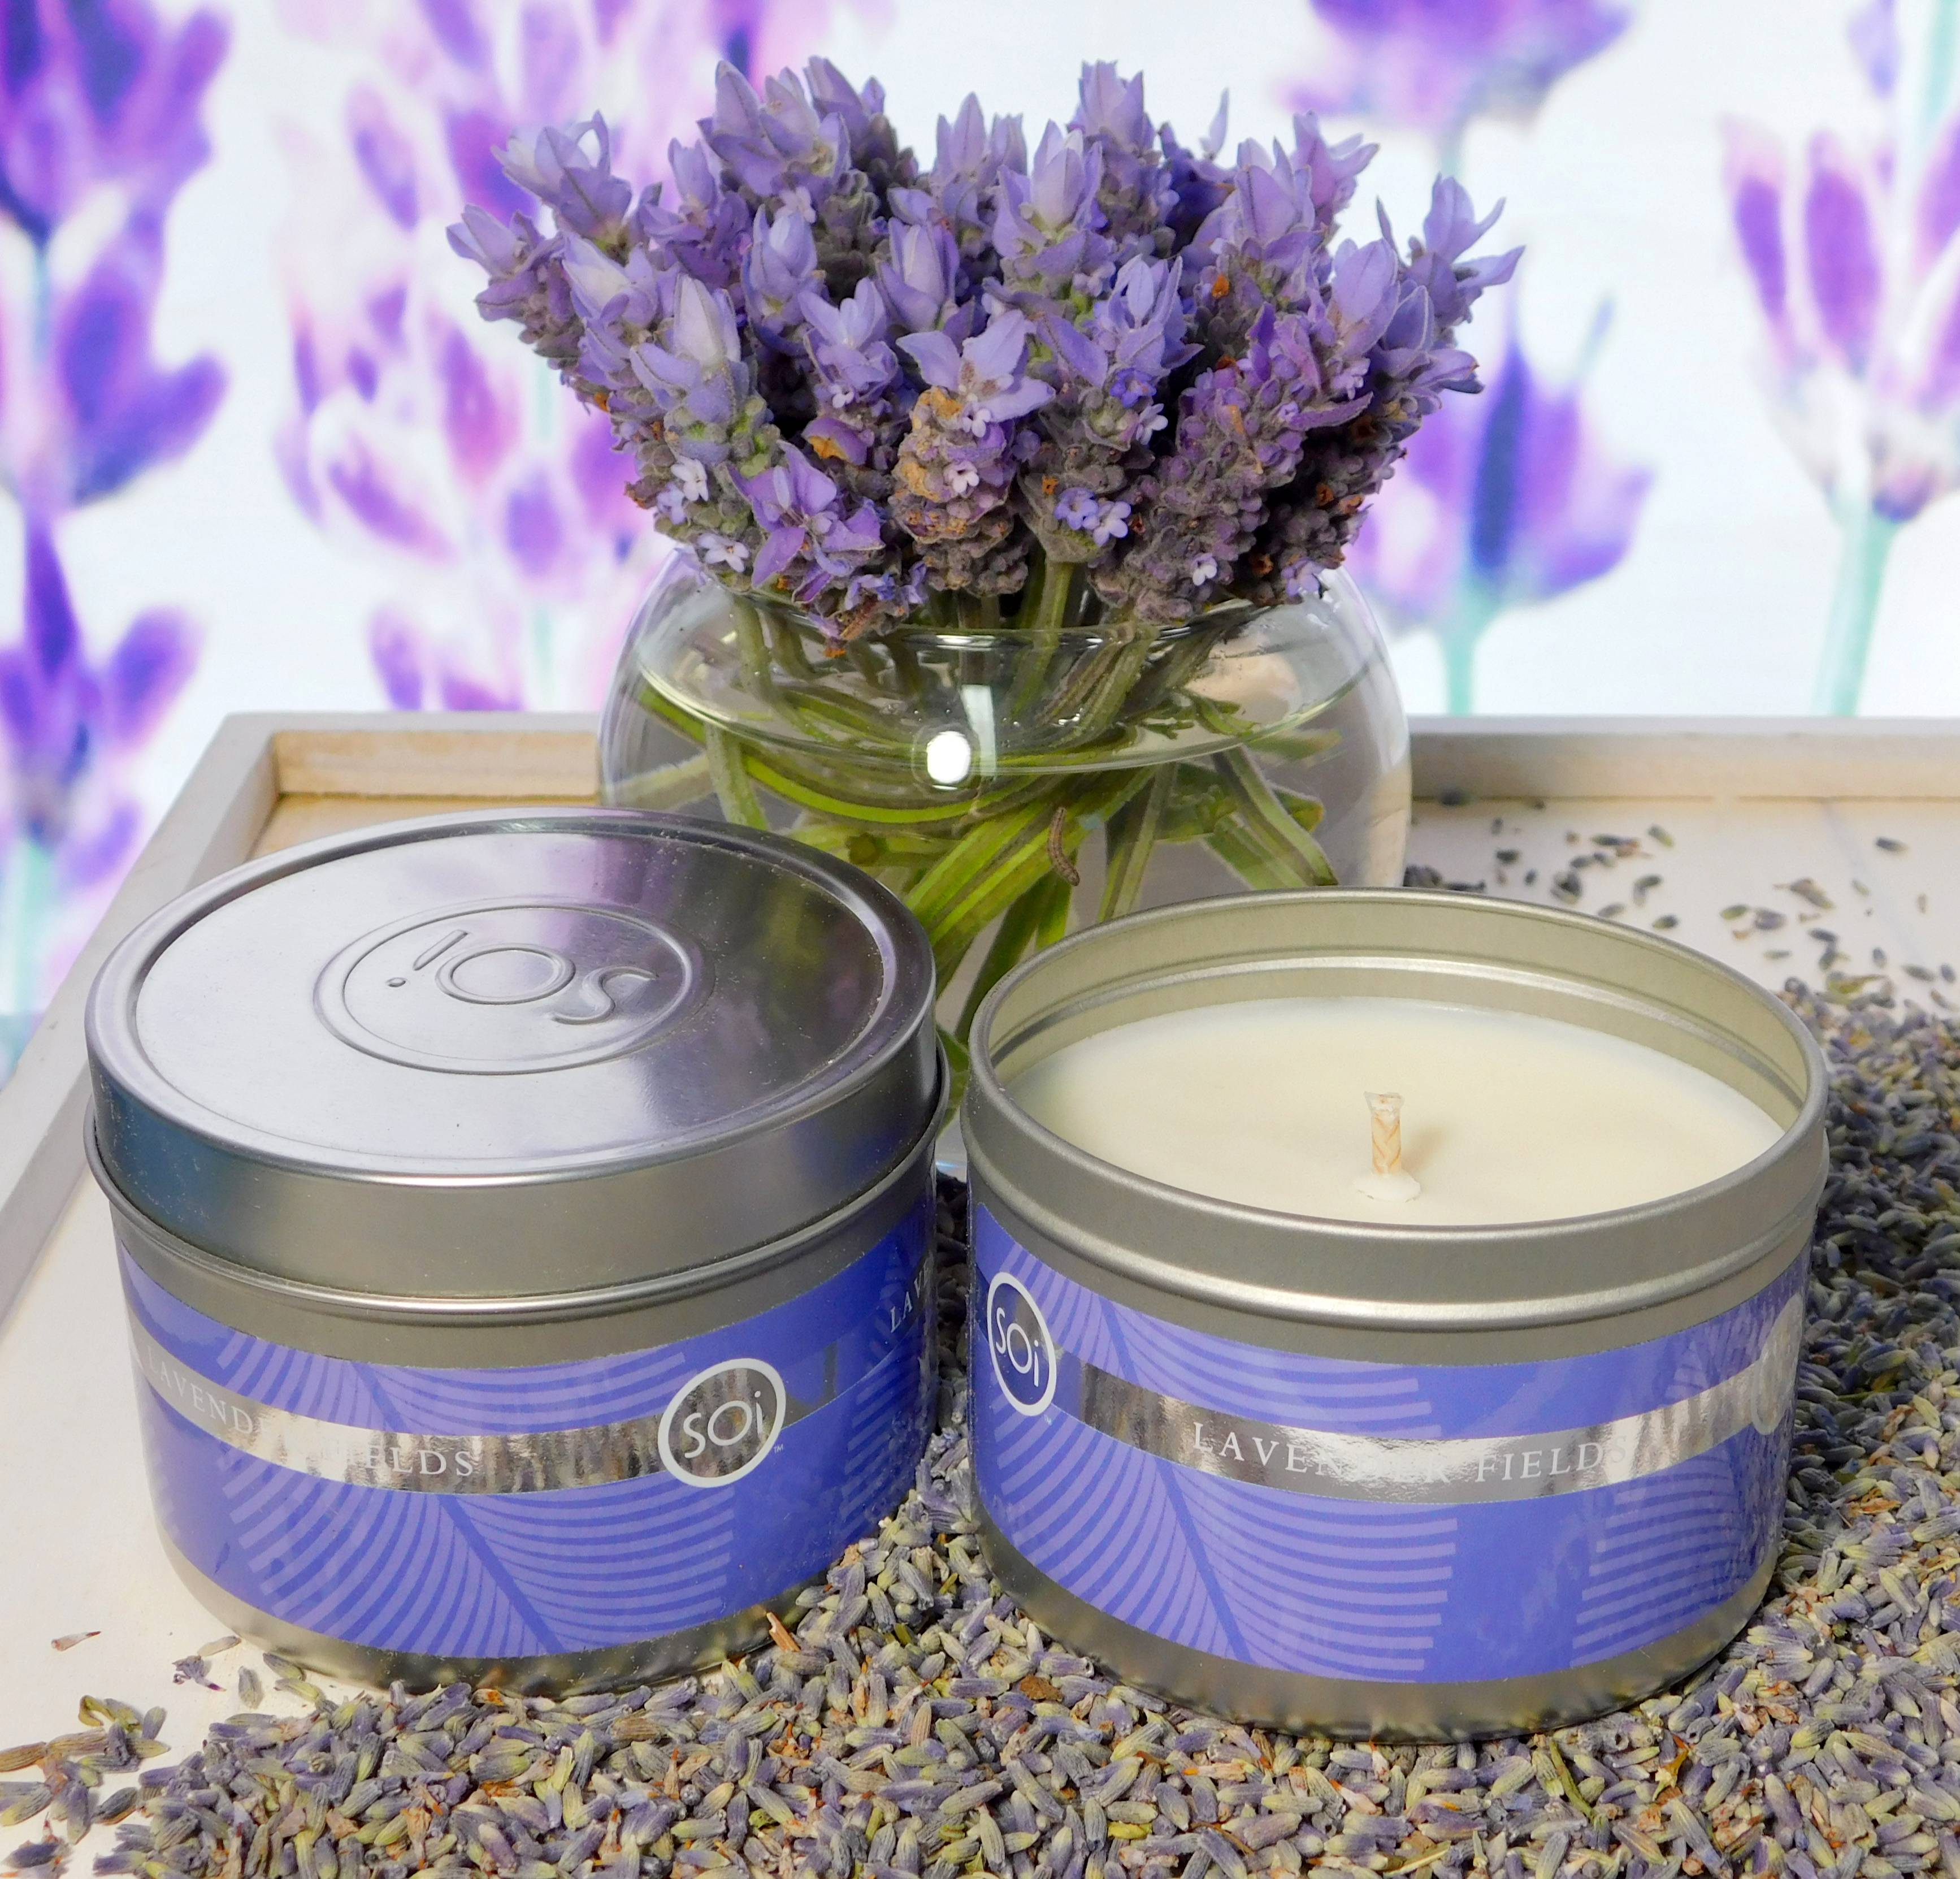 Lavender soy candle for soothing aromatherapy.